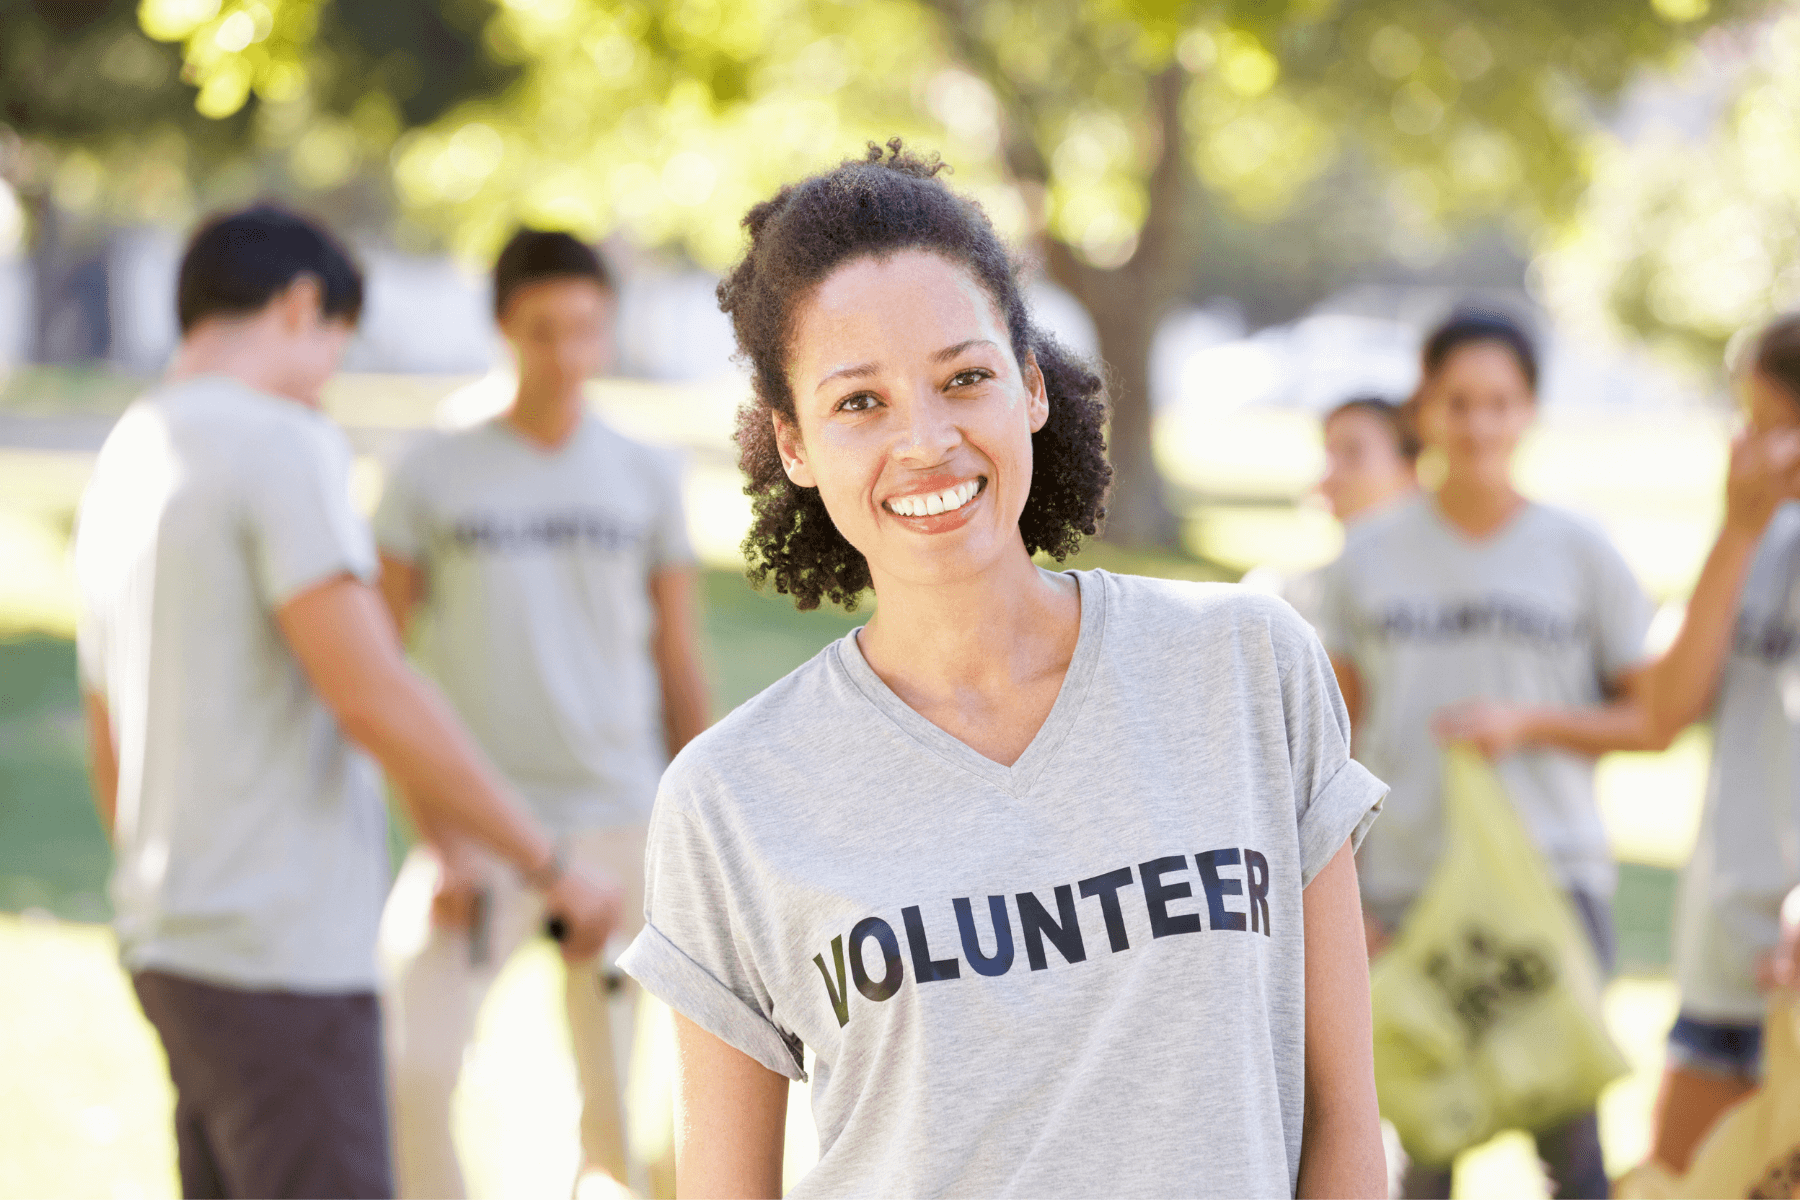 Woman standing in front of group wearing volunteer shirt